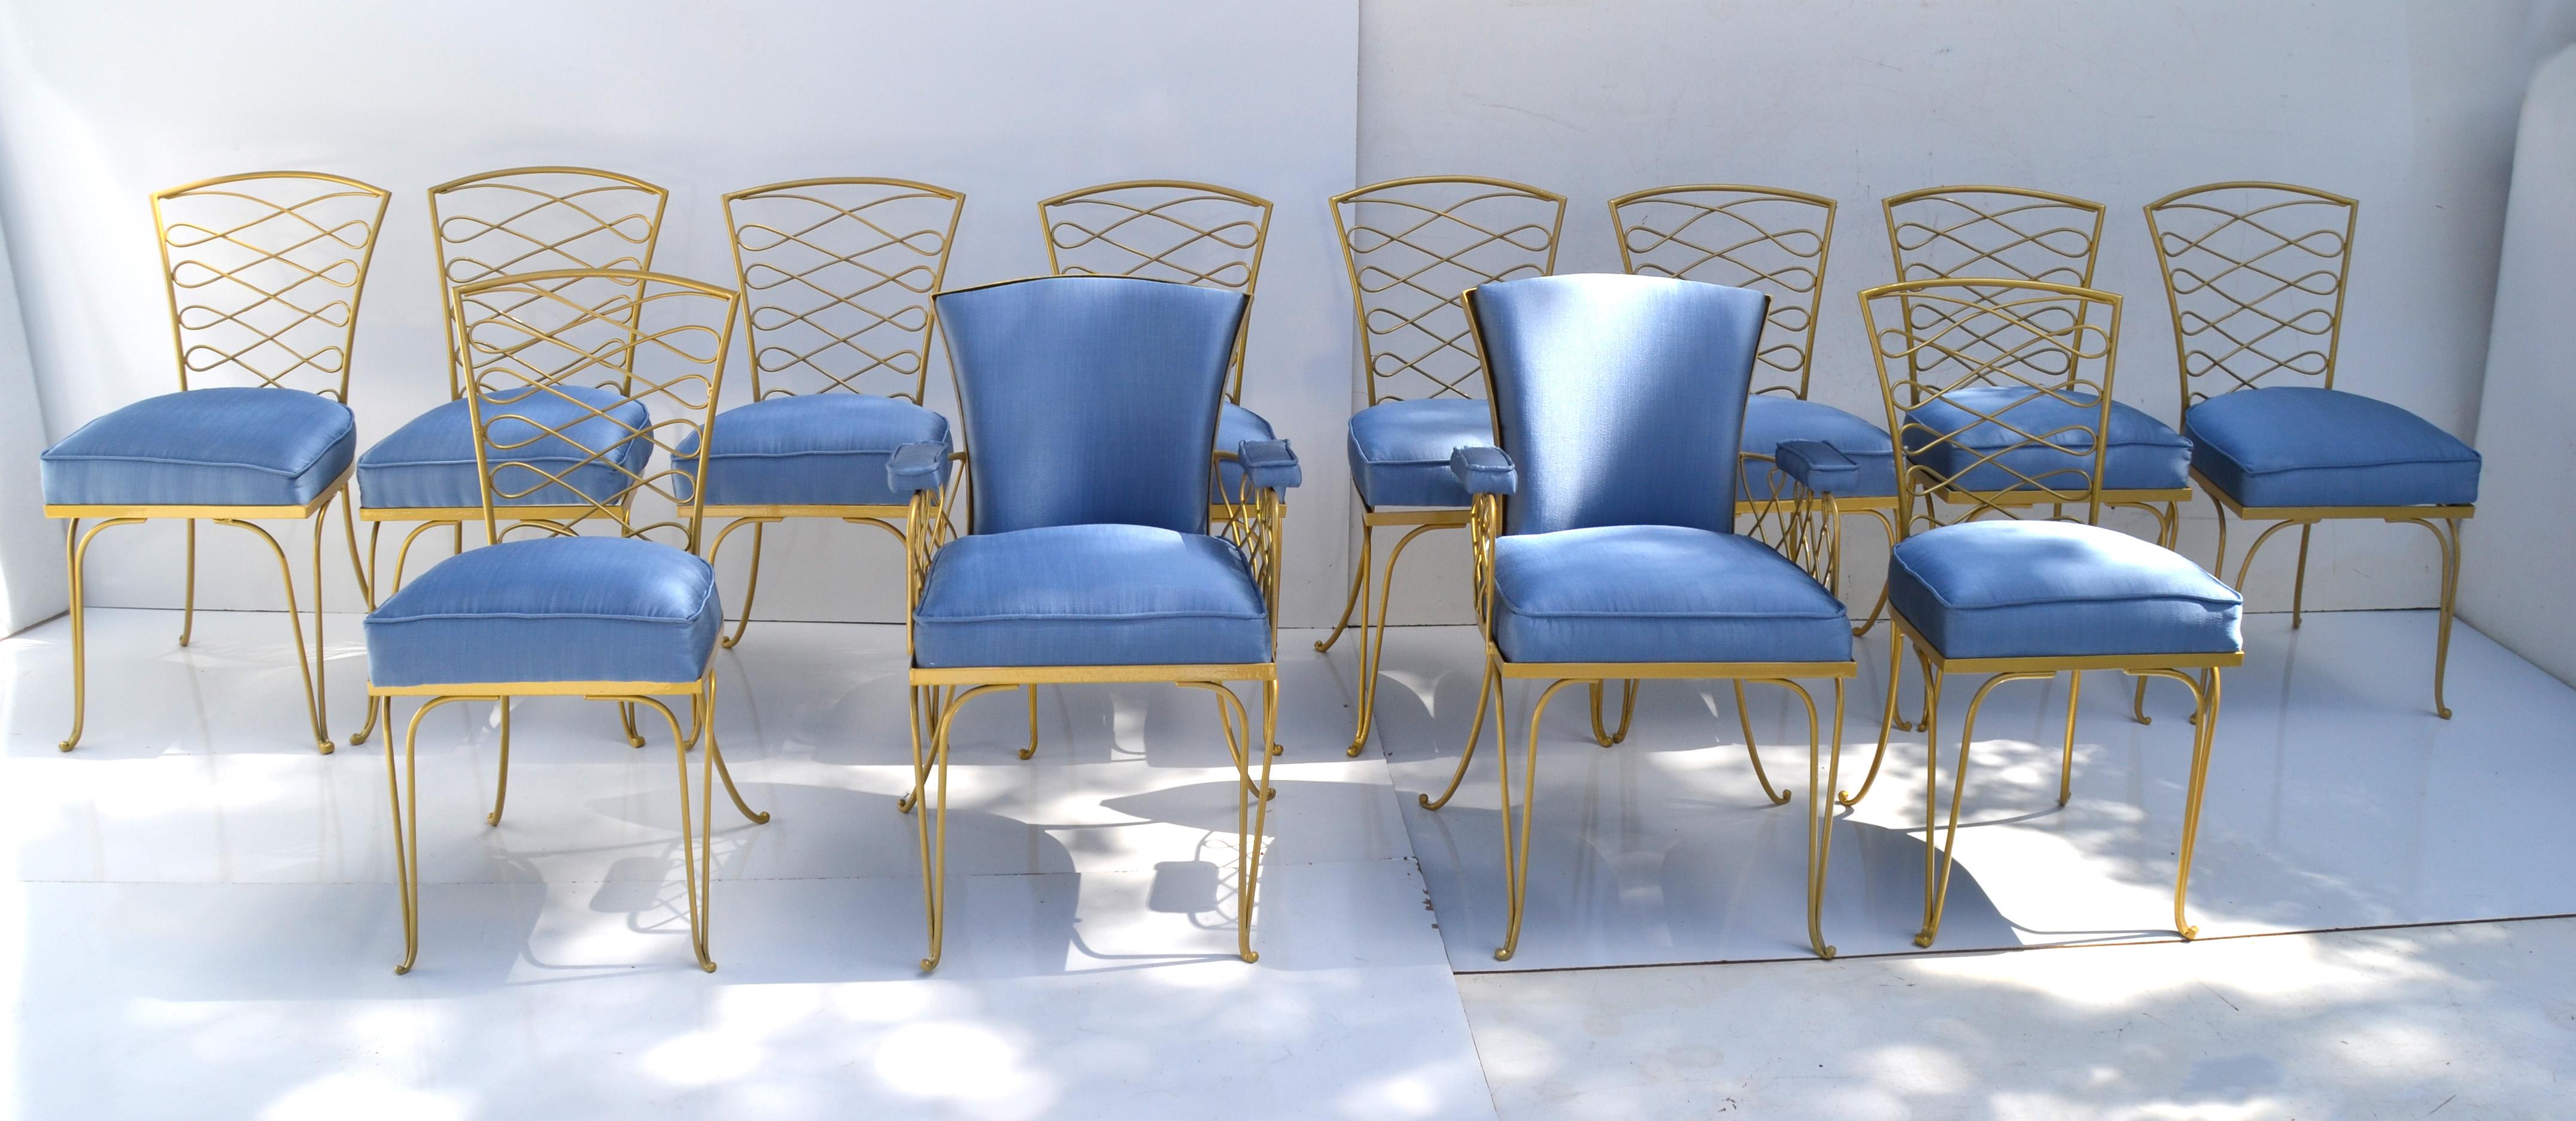 Set of 14 René Prou Art Deco Gold Wrought Iron Dining Room Chairs Blue Fabric  In Good Condition For Sale In Miami, FL